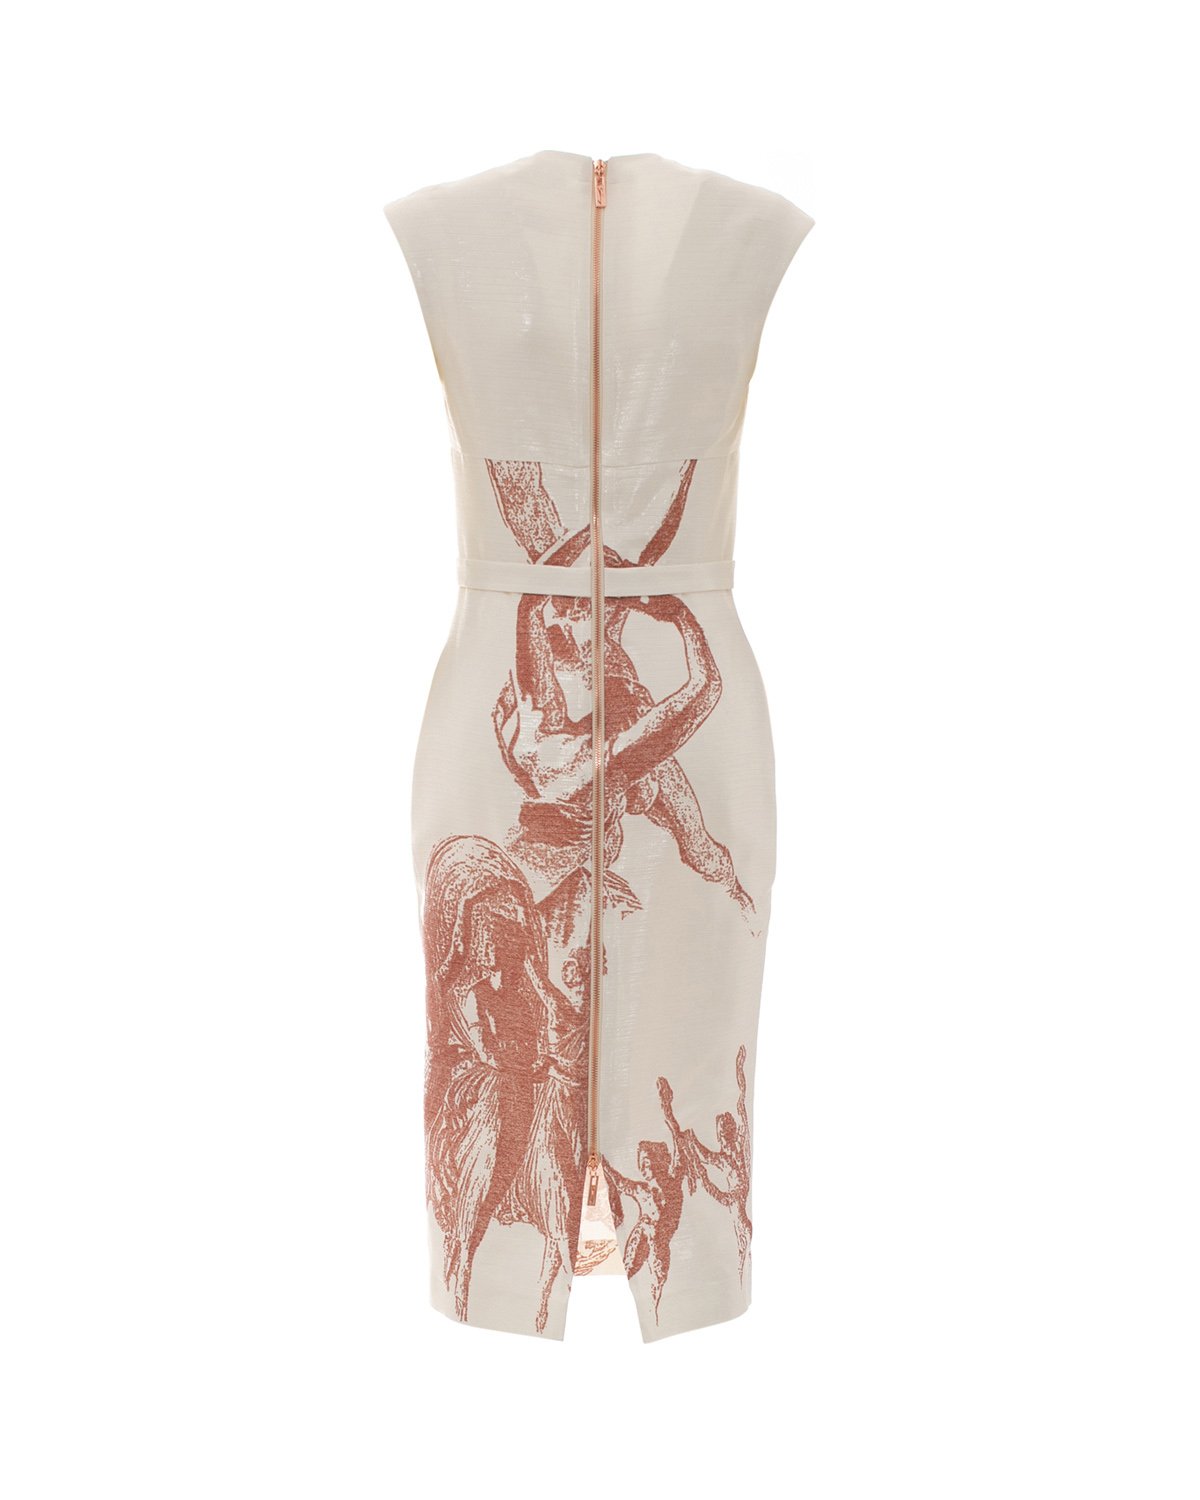  Jacquard printed pussy-bow cocktail dress | Temporary Flash Sale | Genny